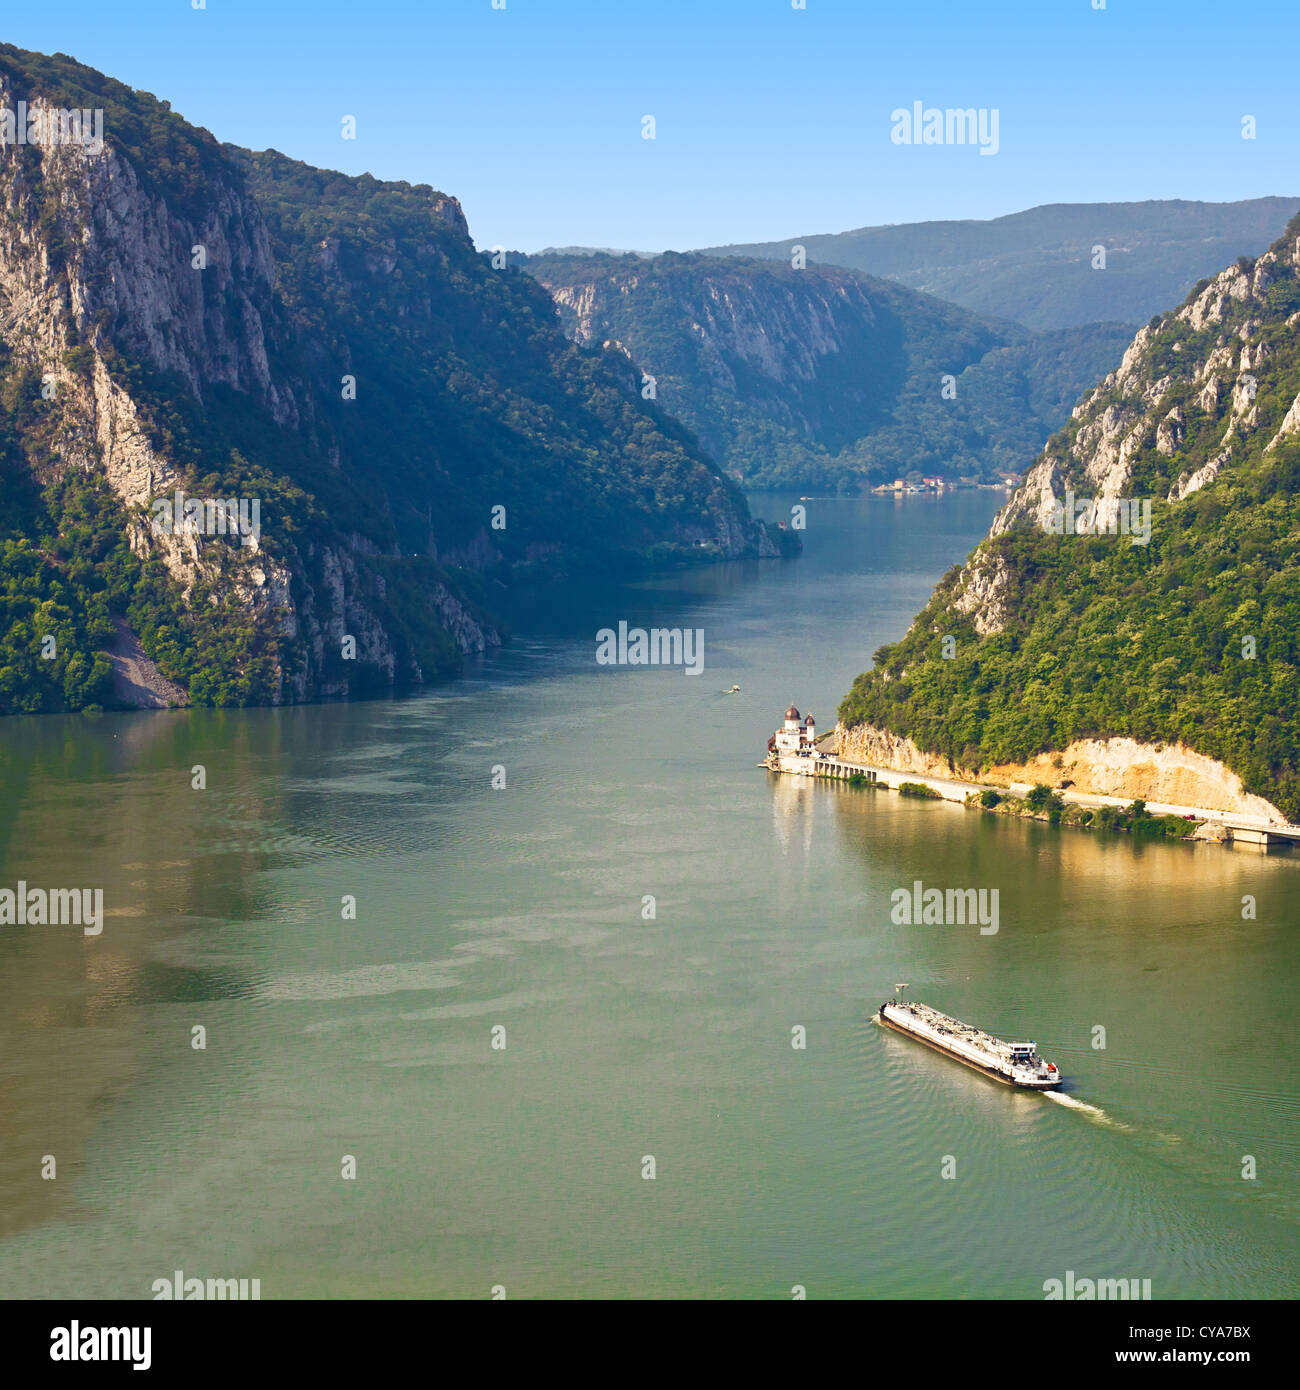 The ship passes through the narrowest part of the gorge on the Danube between Serbia and Romania, also known as the Iron Gate. Stock Photo